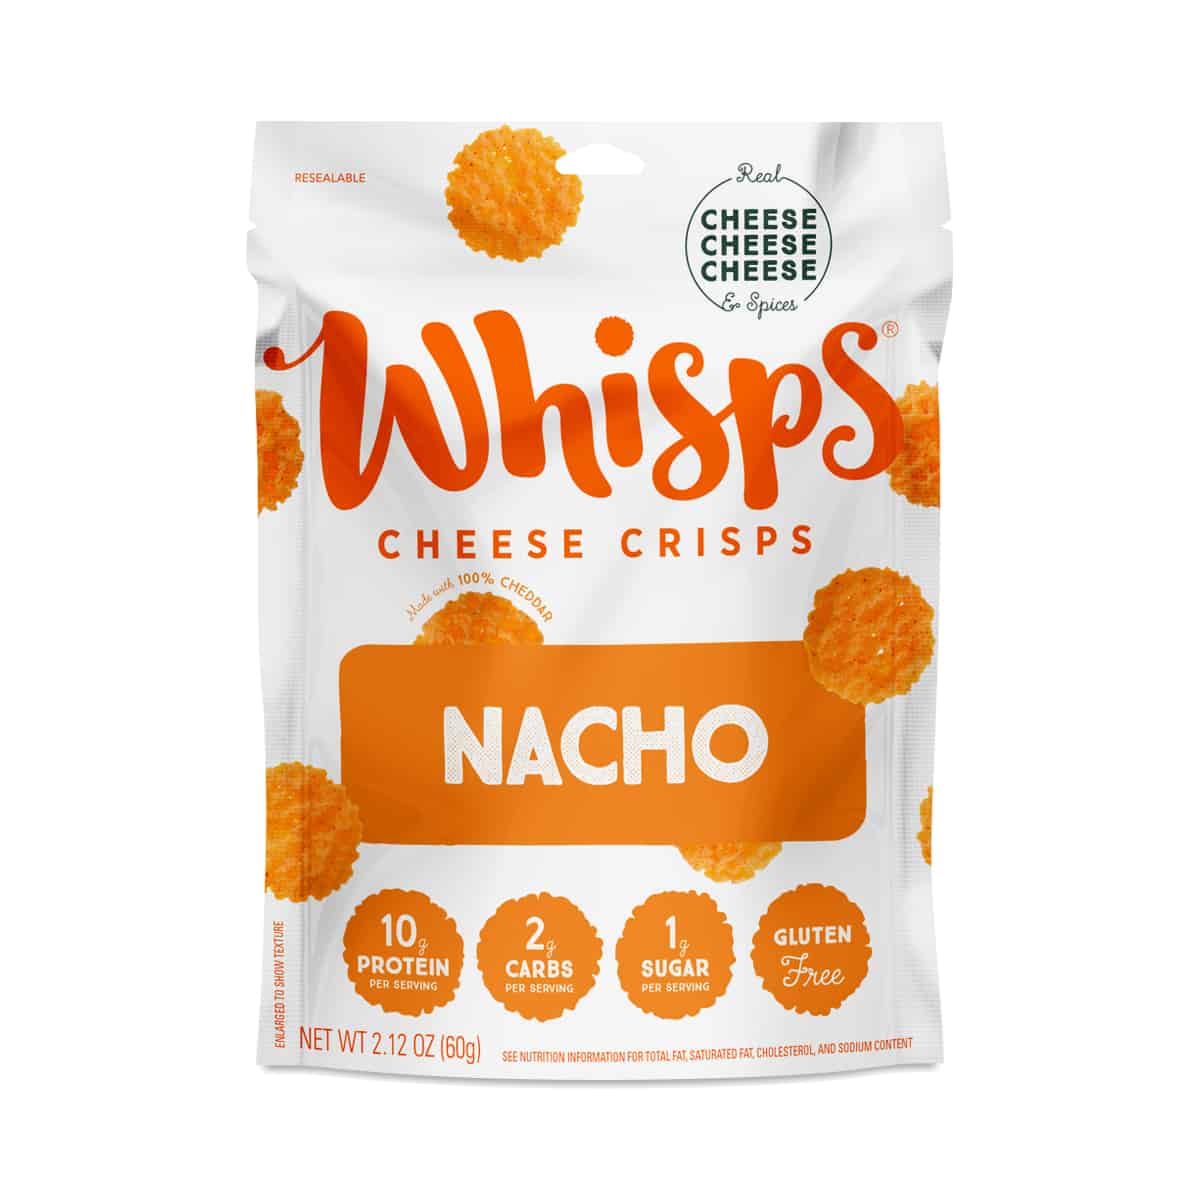 Whiskps cheese crackers.